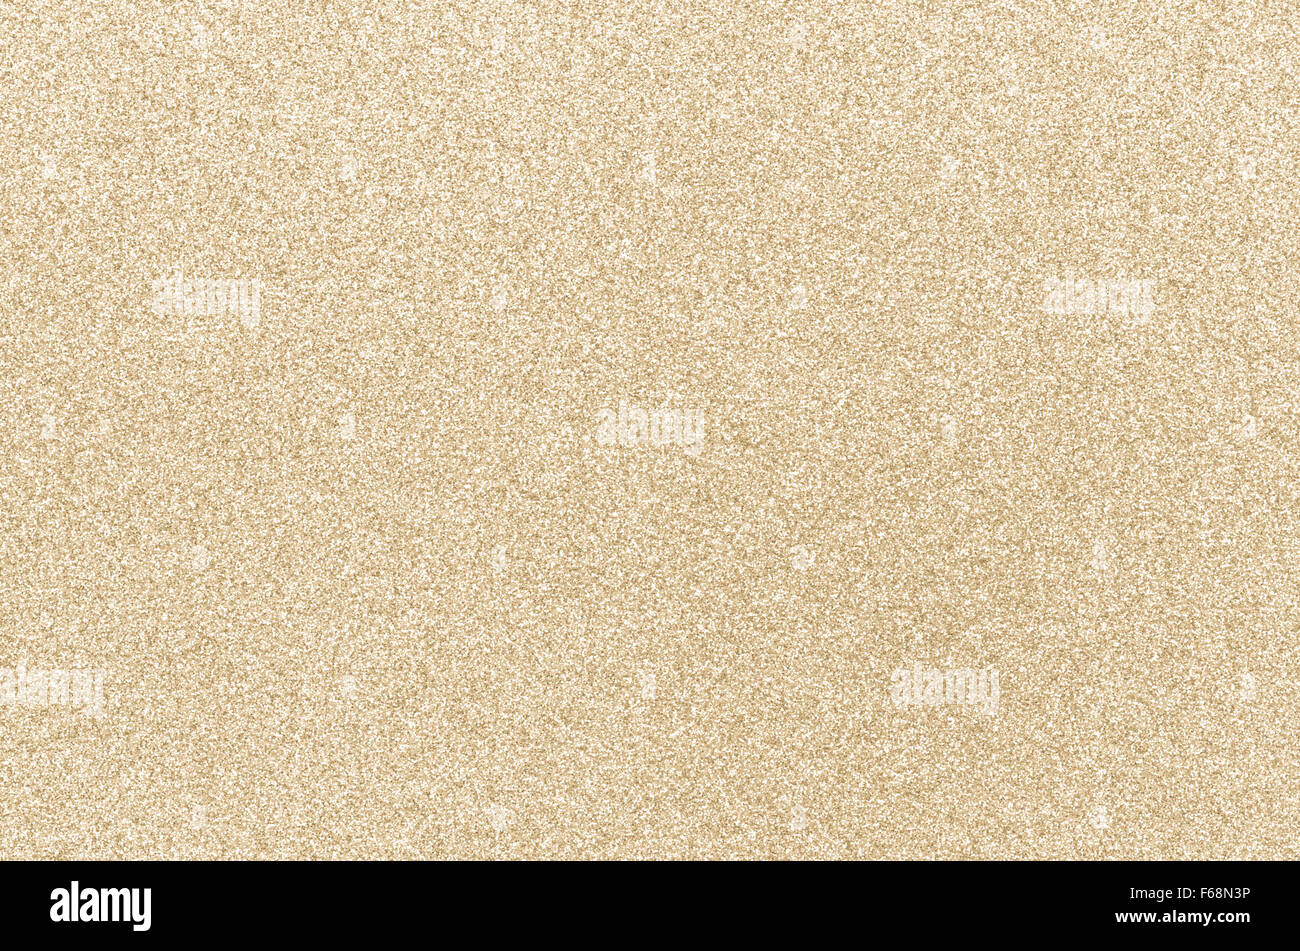 gold glittering paper texture background Stock Photo